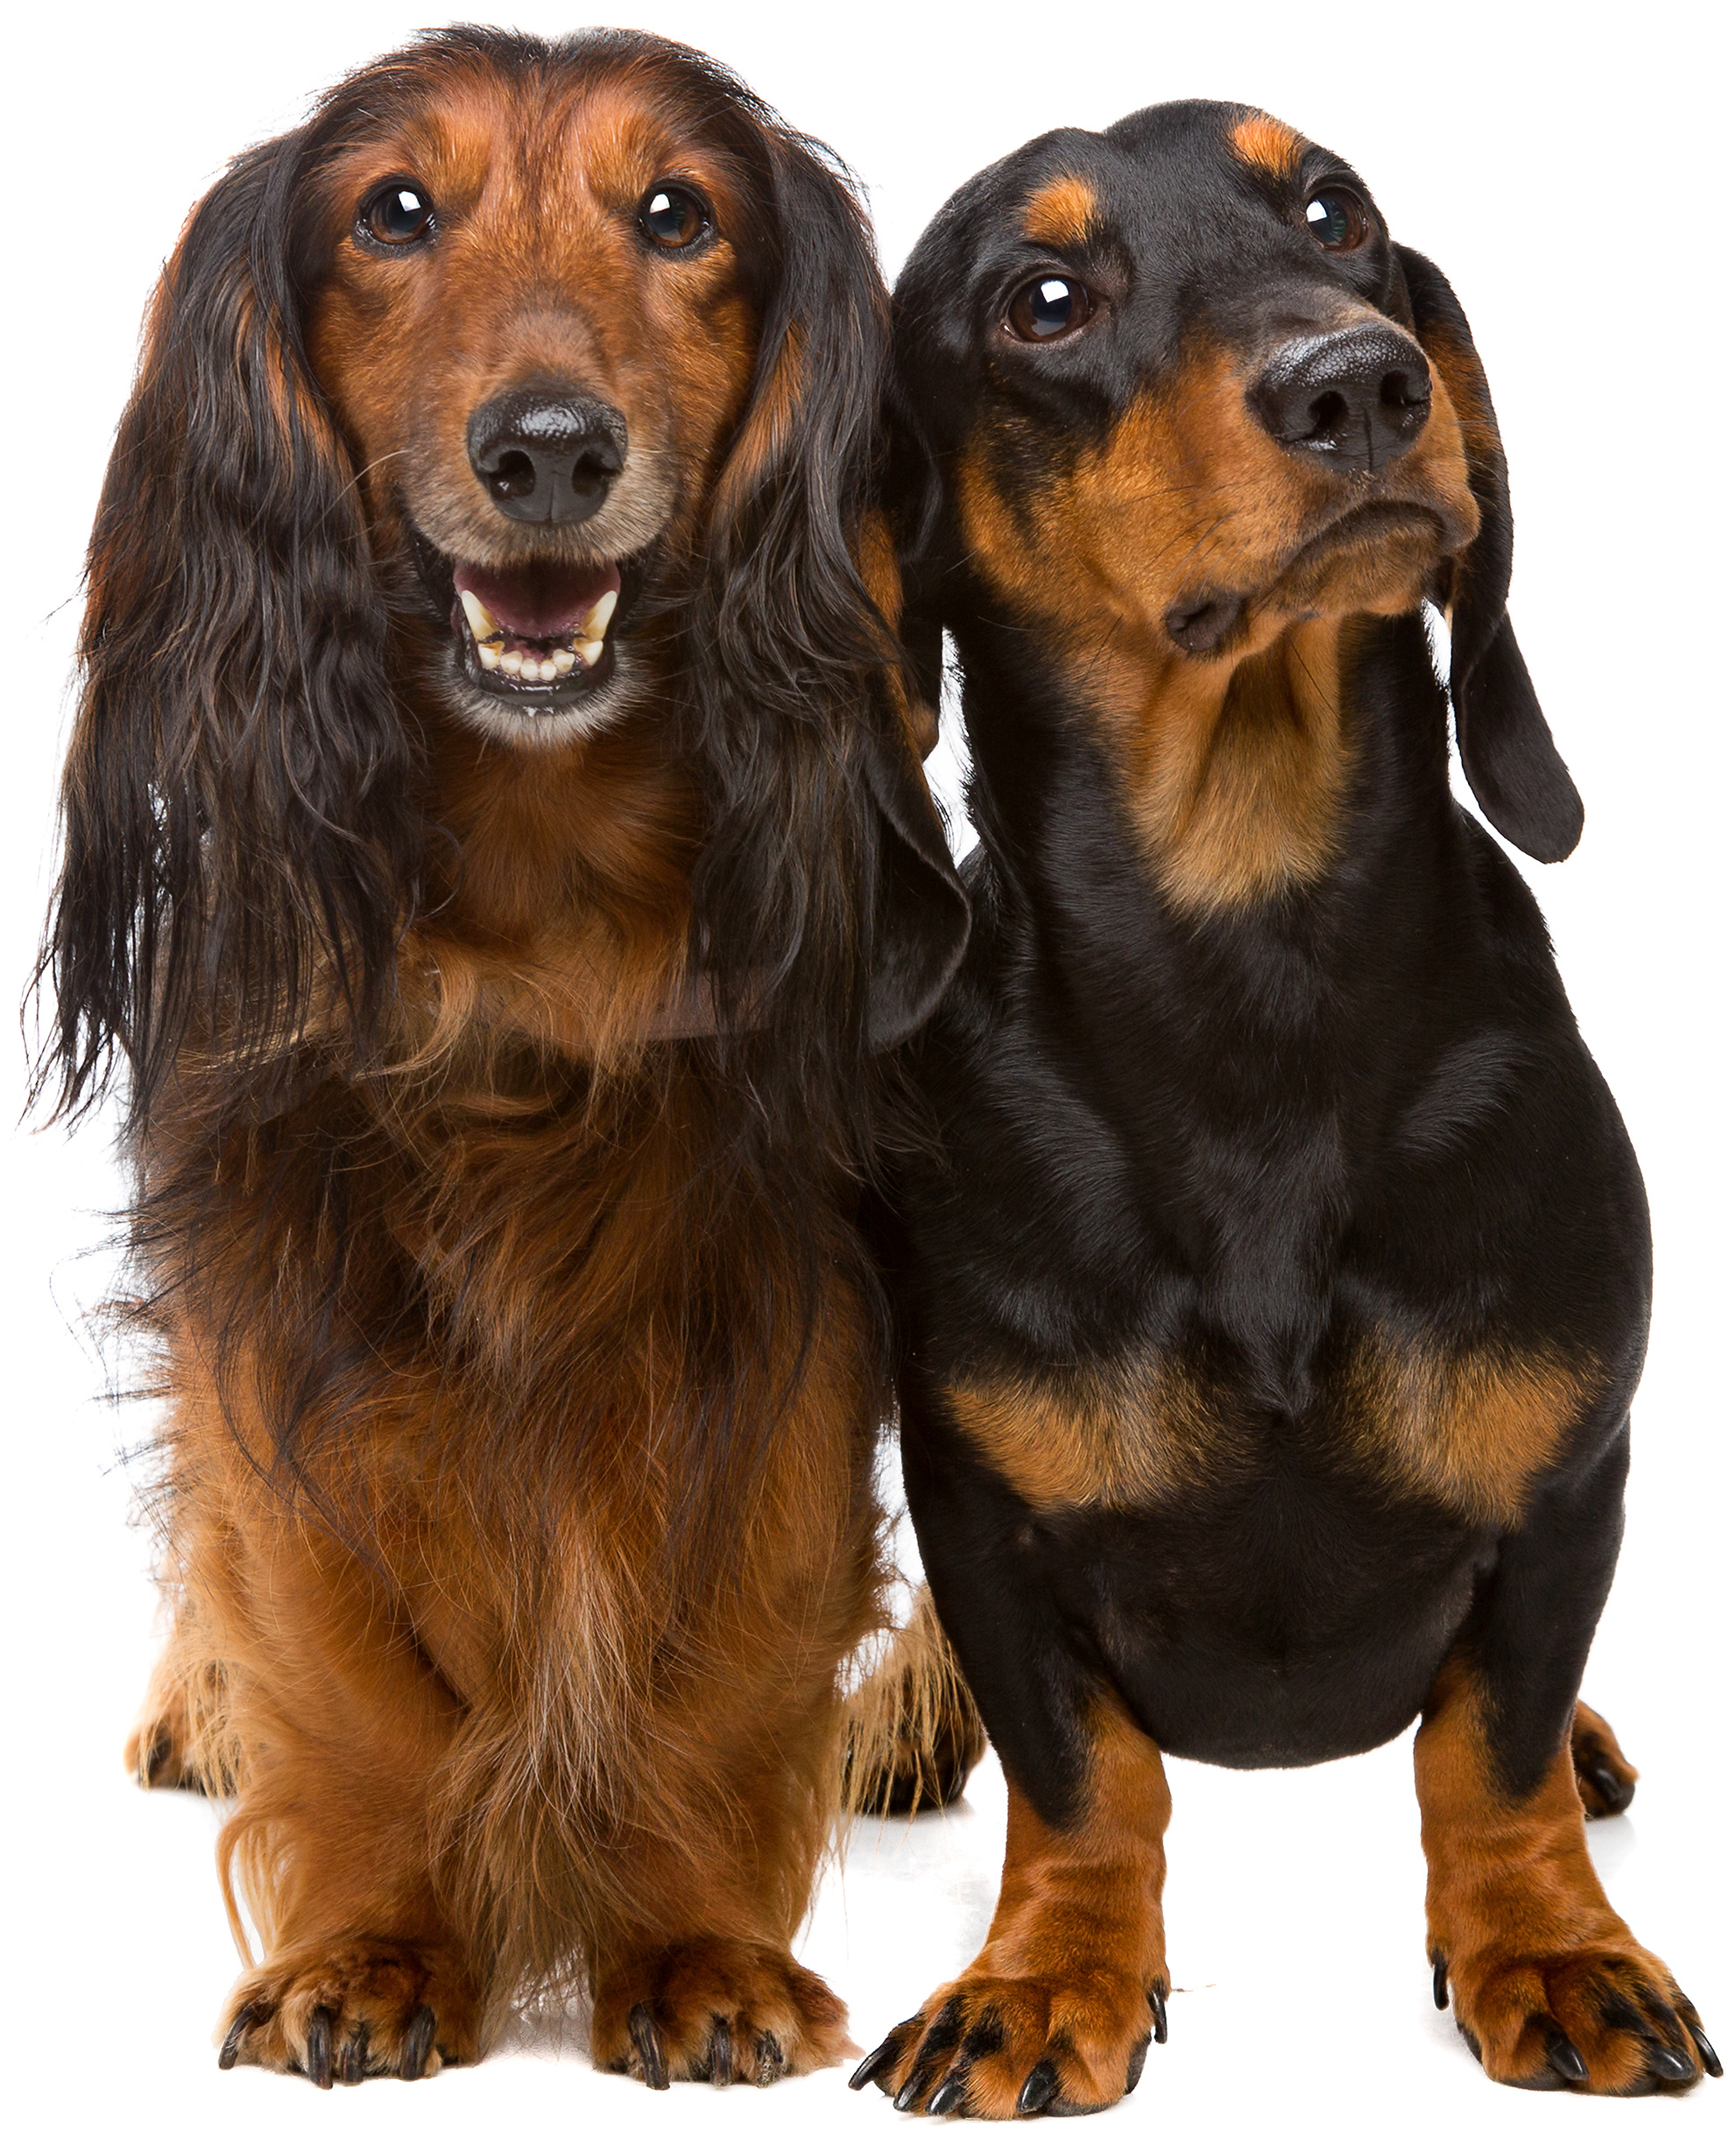 Two dachshund dogs